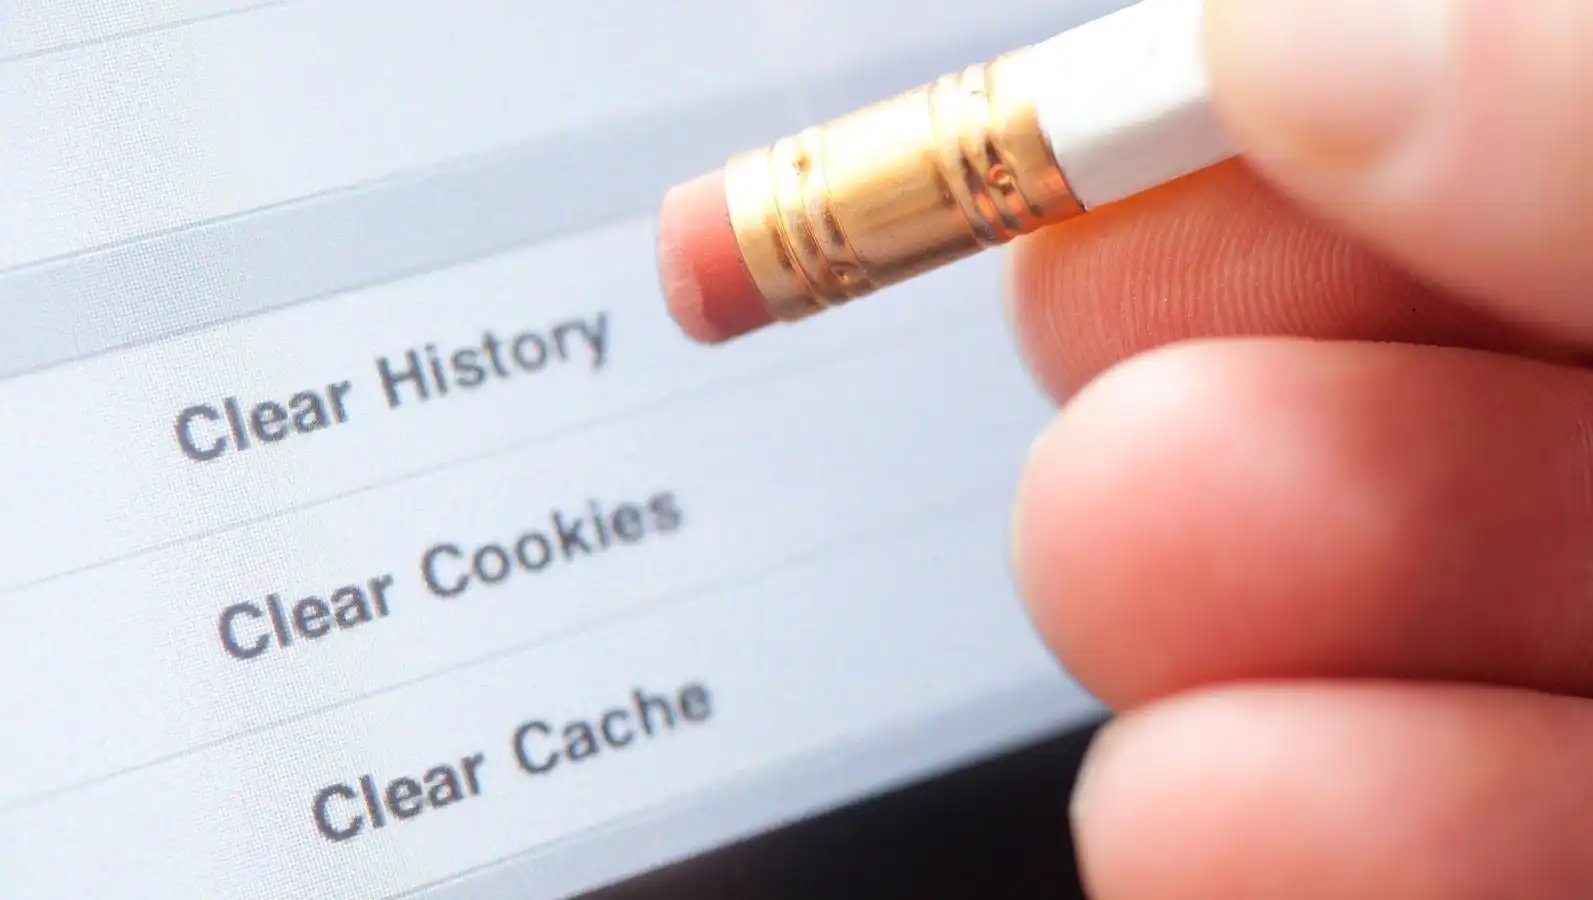 Clear Cache and Cookies: